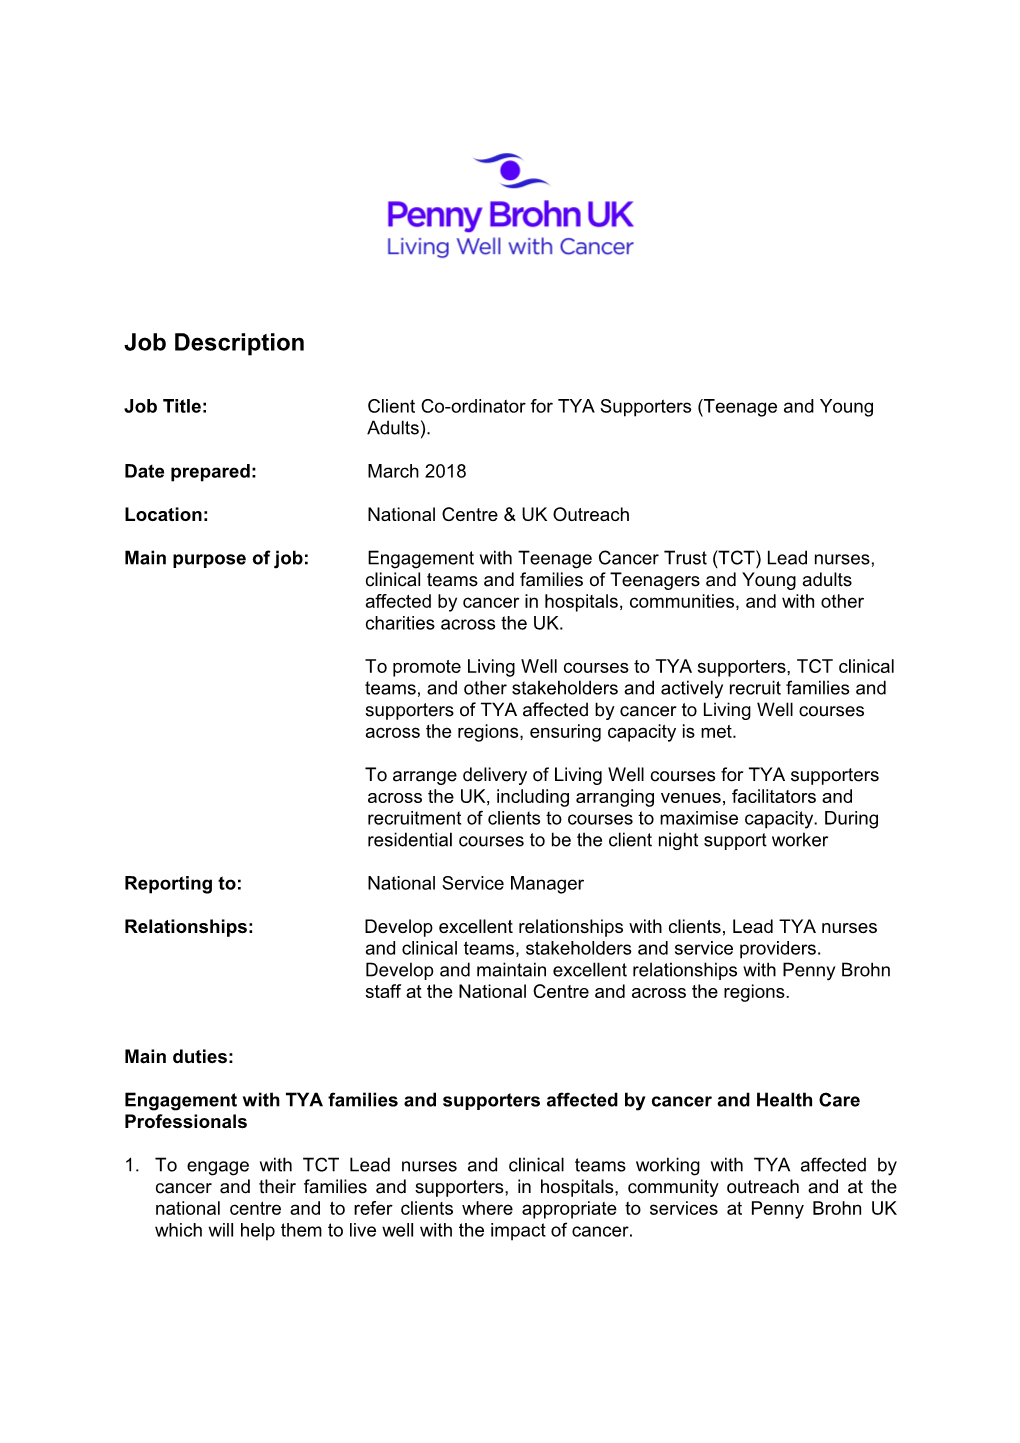 Job Title: Client Co-Ordinator for TYA Supporters (Teenage and Young Adults)